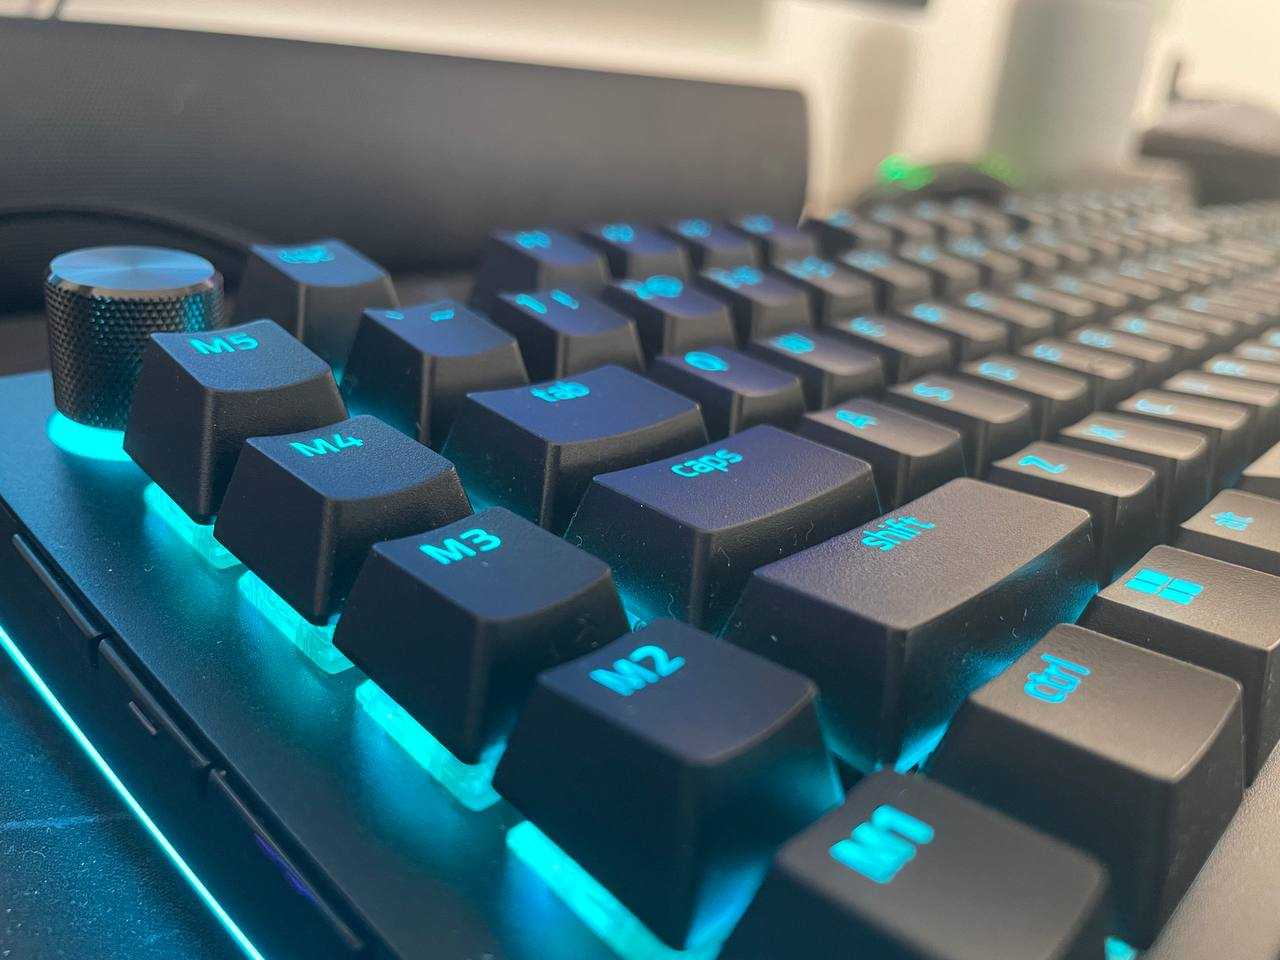 Razer Blackwidow V4 Pro review: the queen of gaming and more